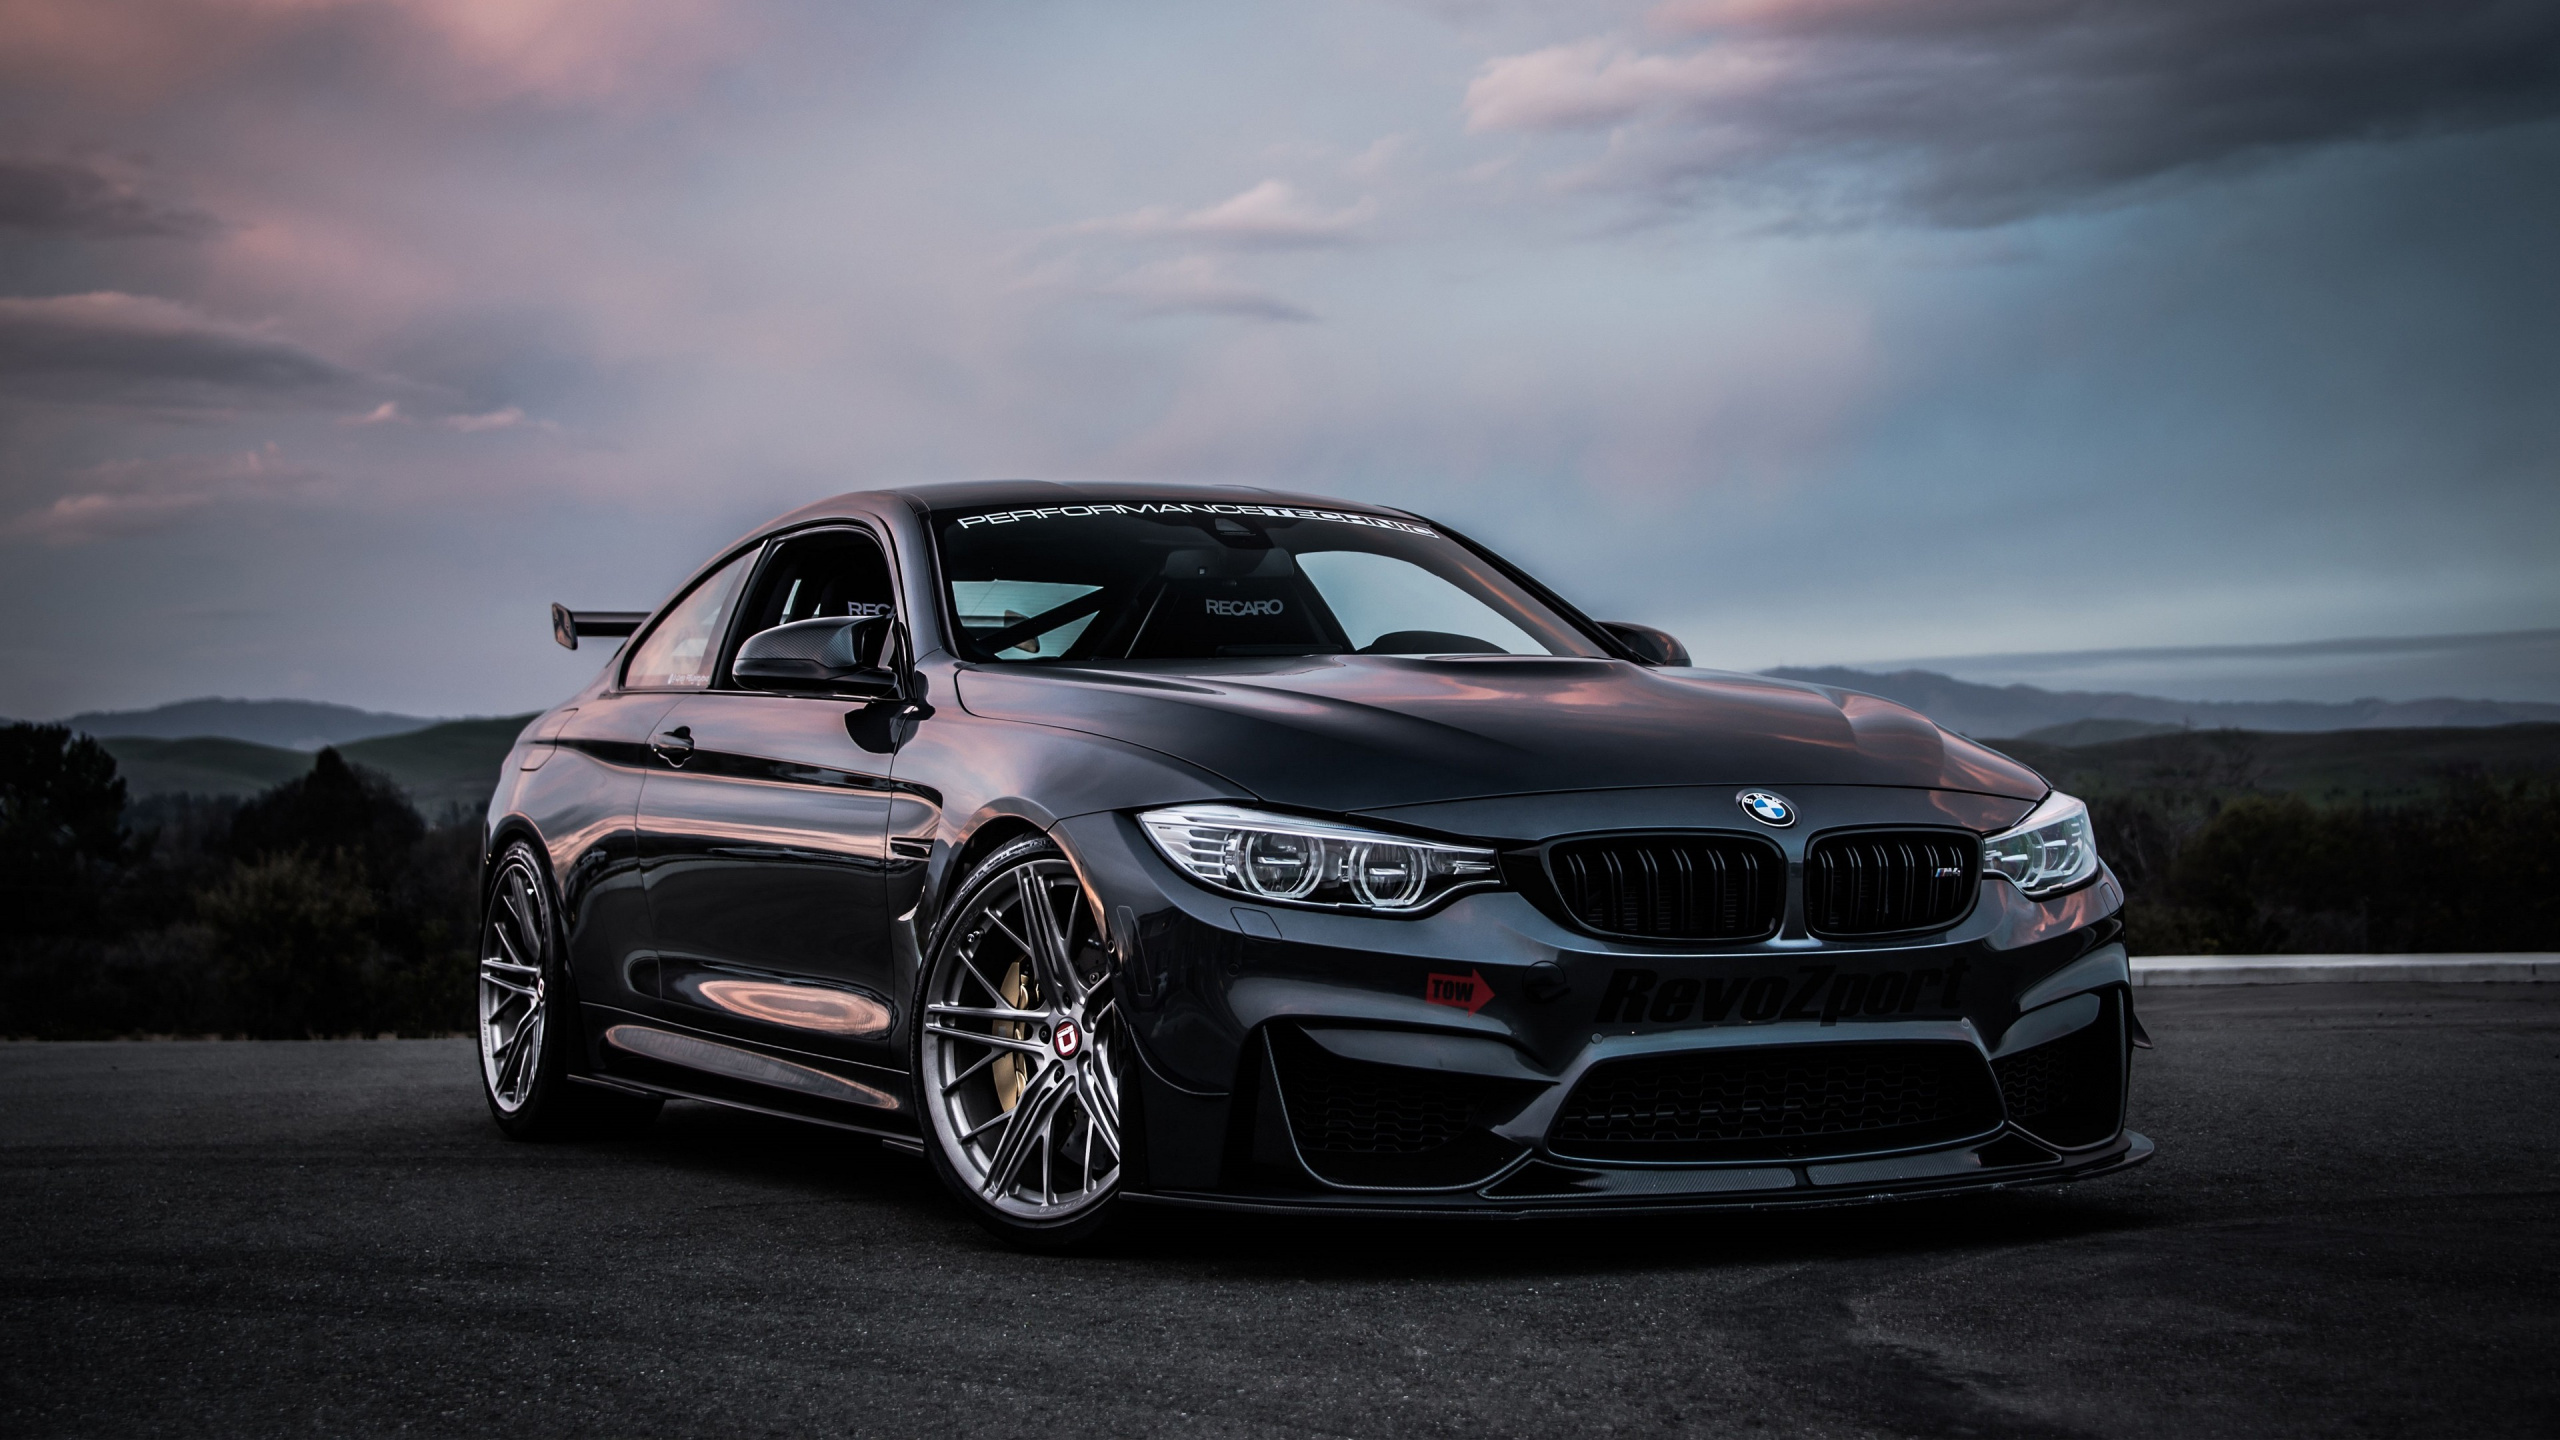 Negro Bmw m 3 Coupe. Wallpaper in 2560x1440 Resolution